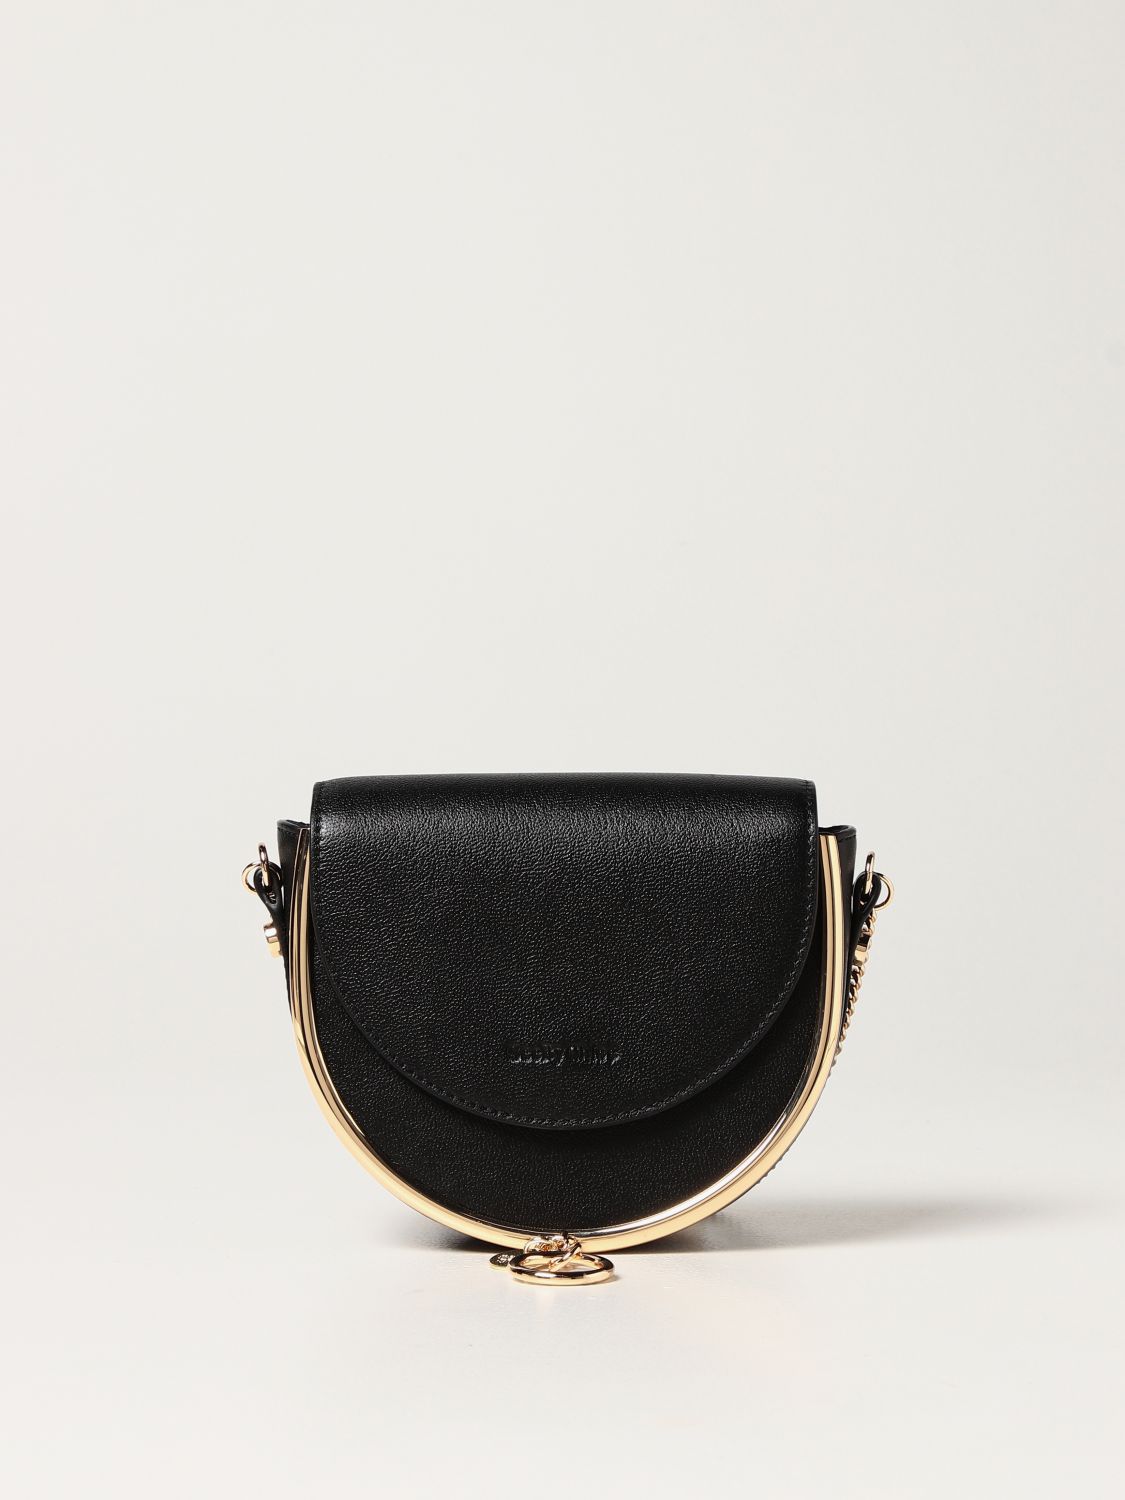 SEE BY CHLOÉ: Mara clutch in grained leather - Black | See By Chloé ...